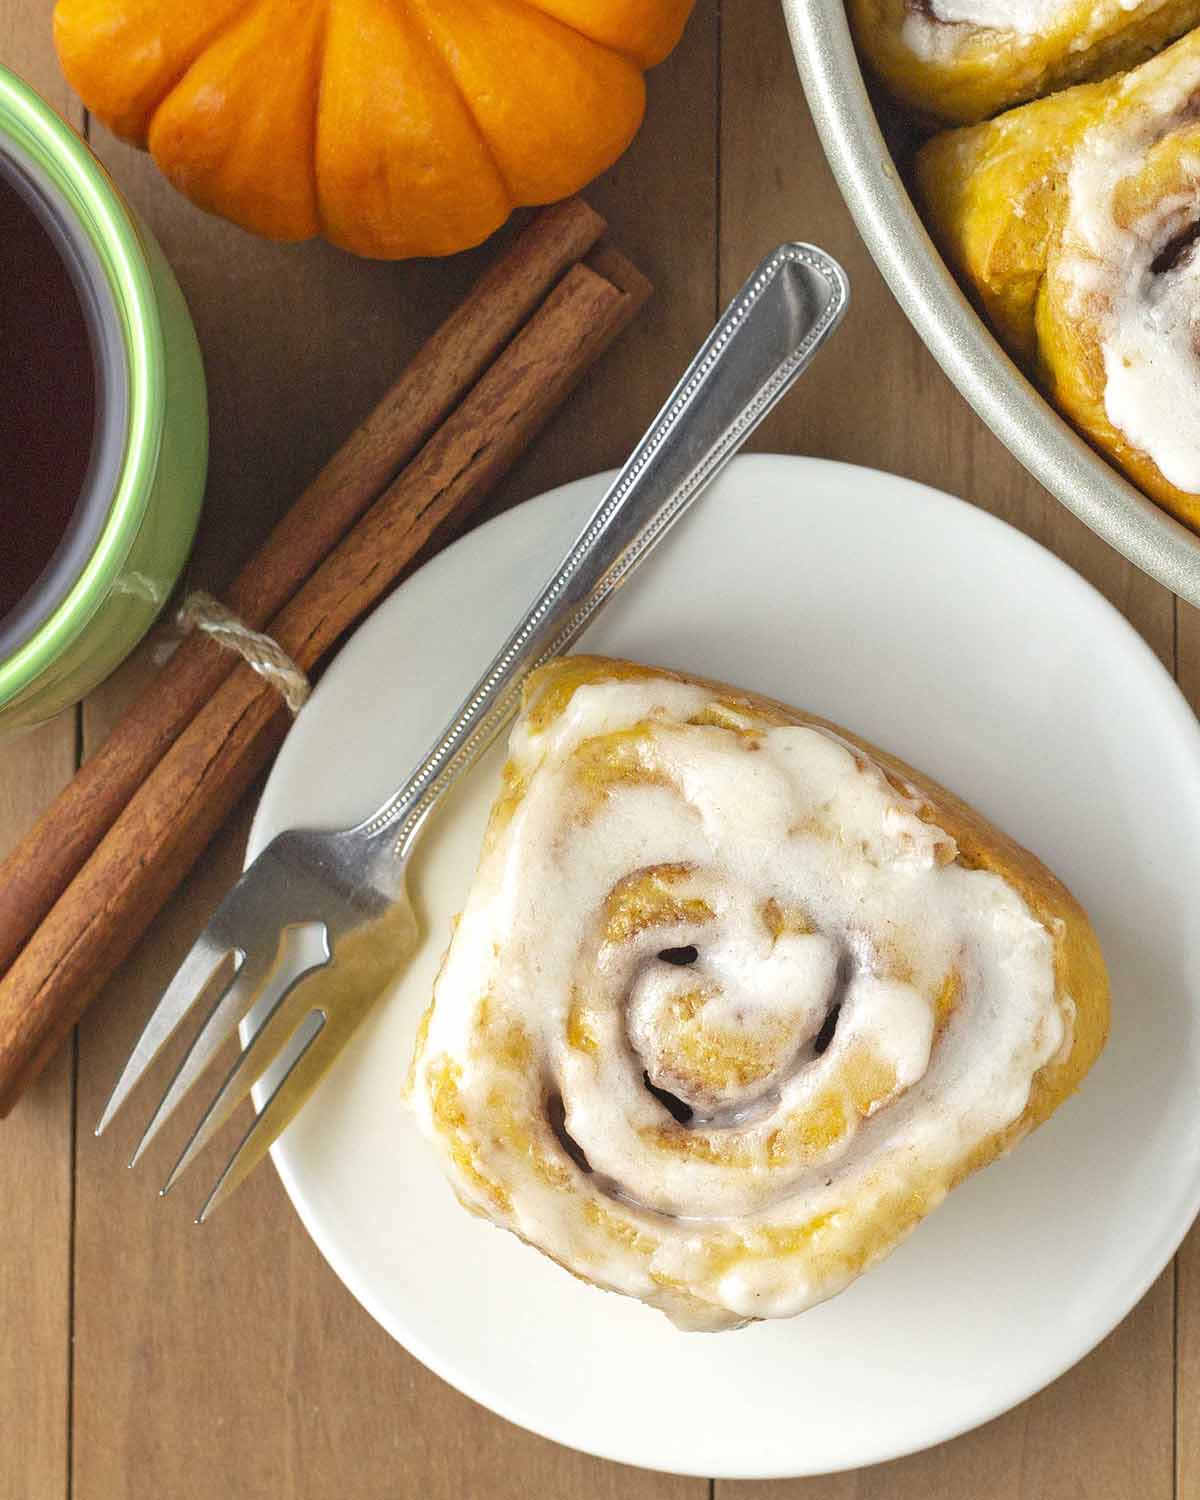 Overhead images showing a frosted pumpkin cinnamon roll on a white plate.